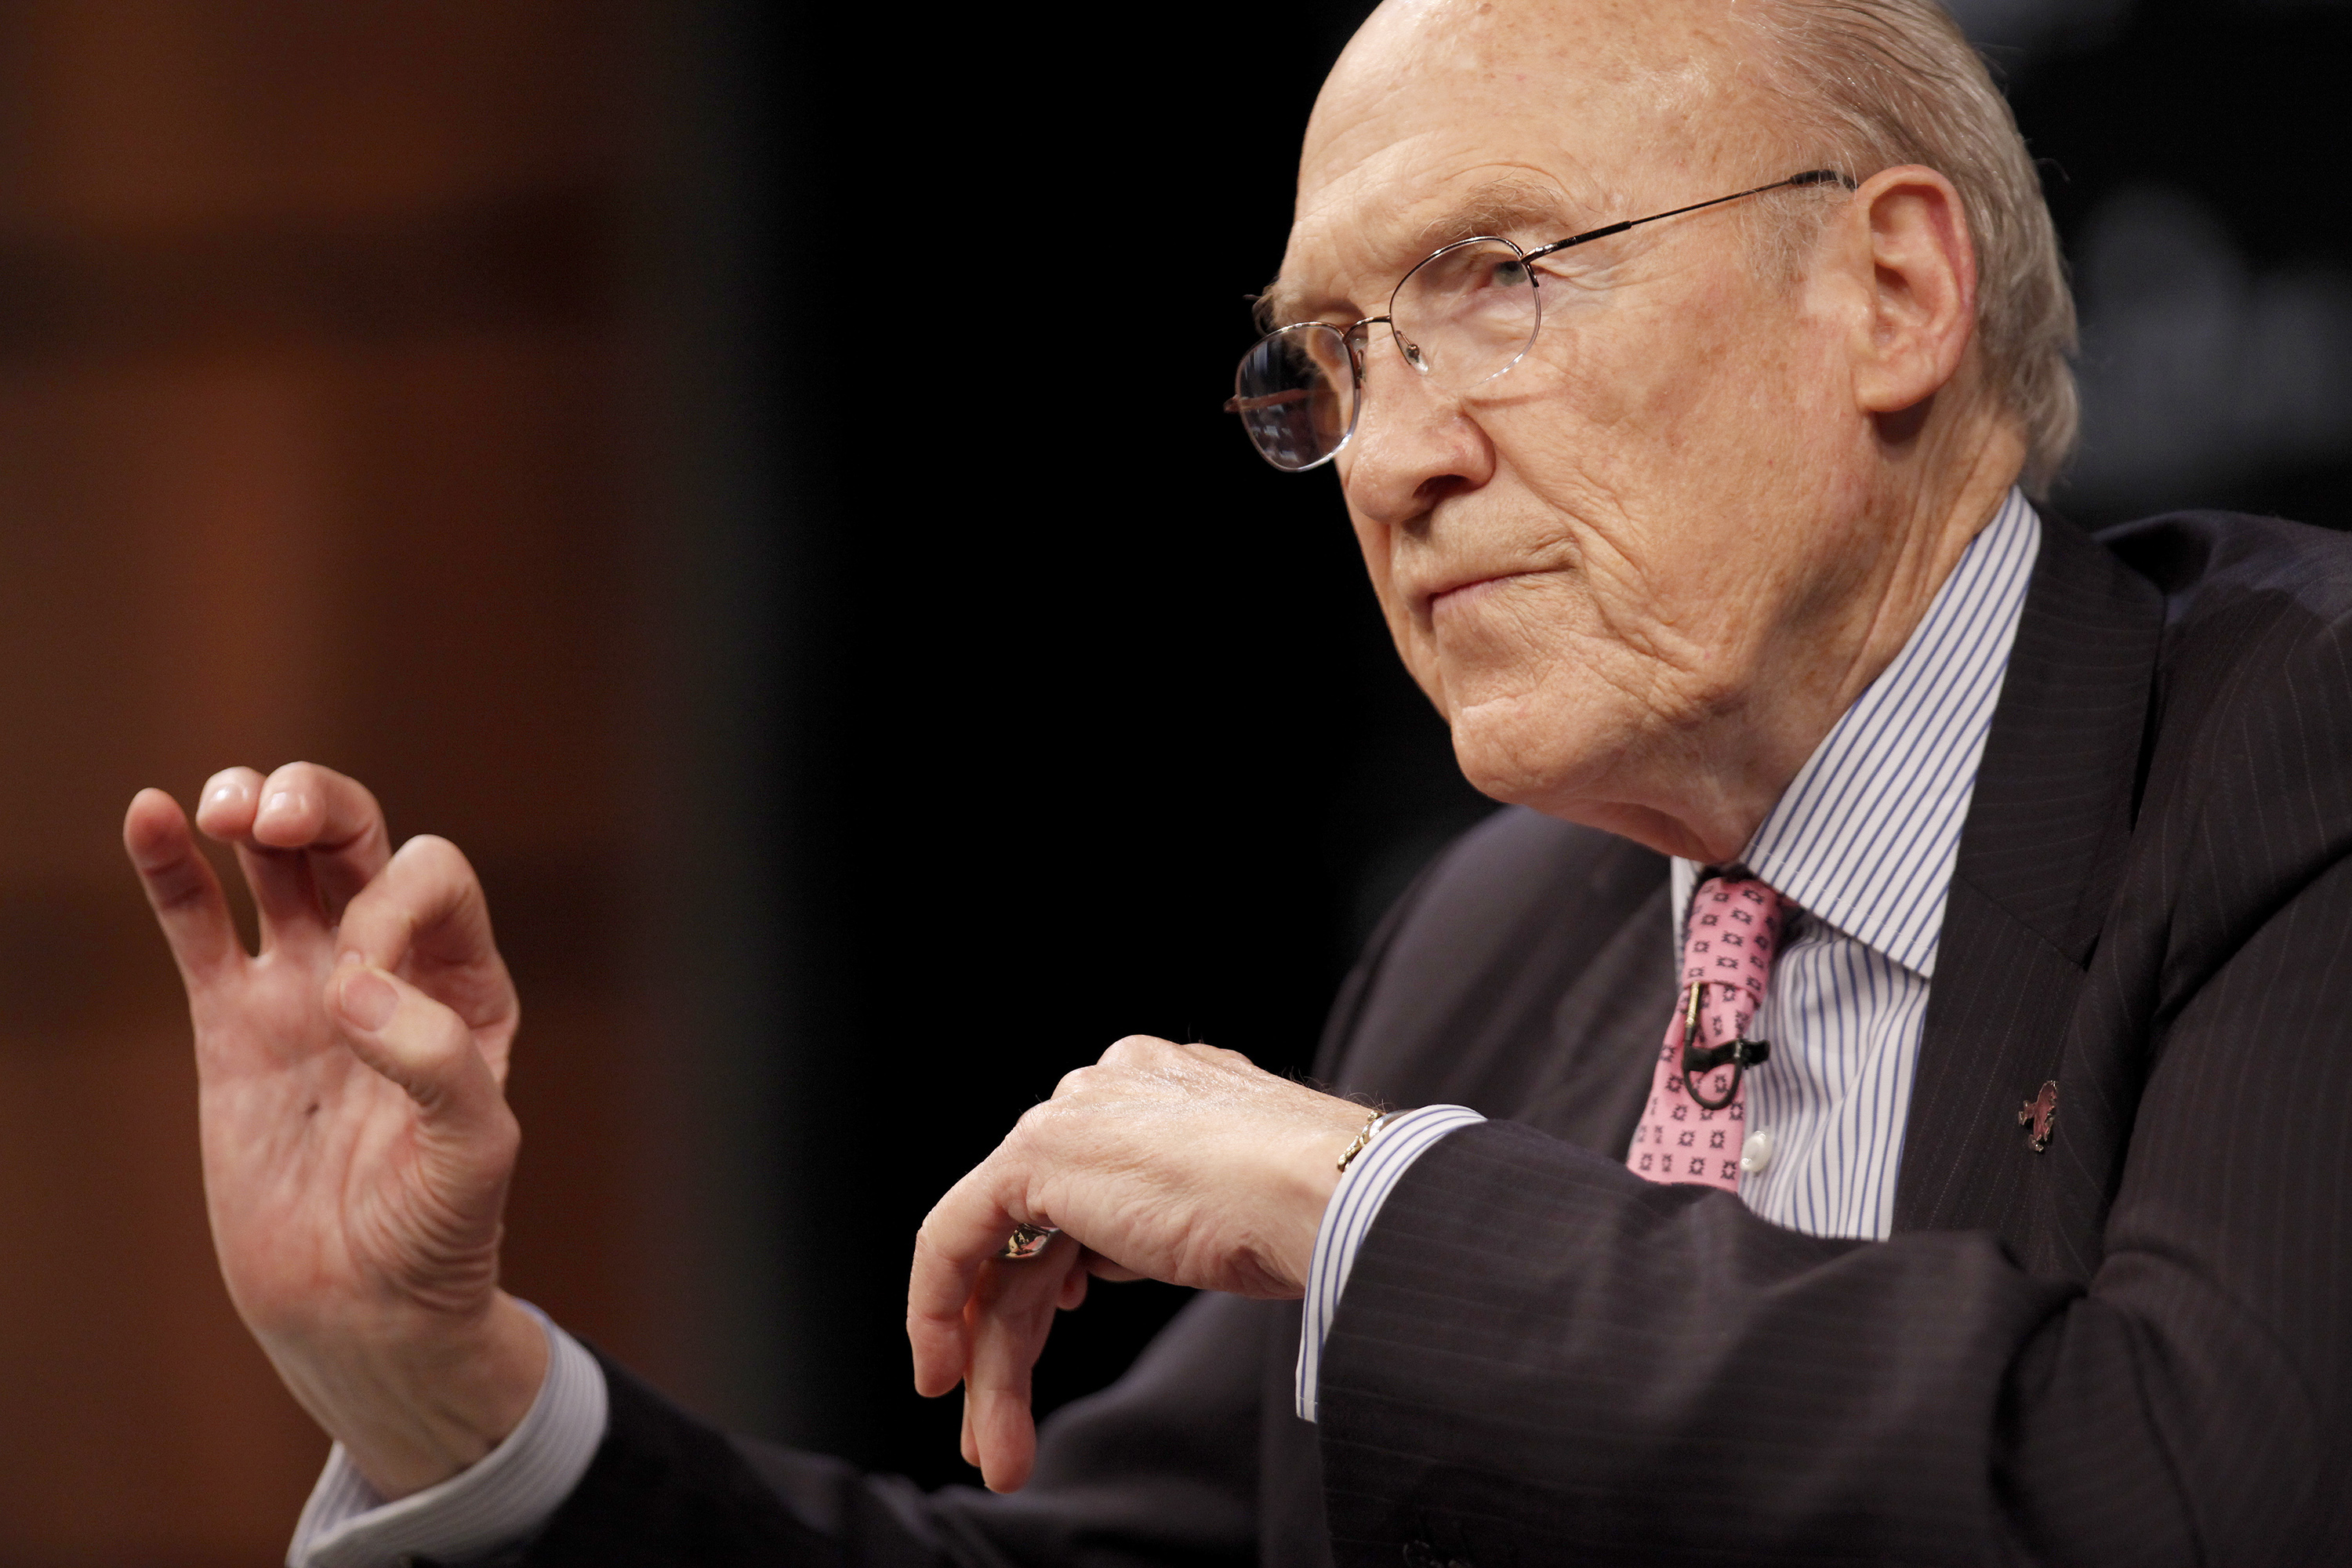 Alan Simpson, former co-chairman of the National Commission on Fiscal Responsibility and Reform, speaks during the Moment Of Truth Project event in Washington, D.C., U.S., on April 19, 2013.